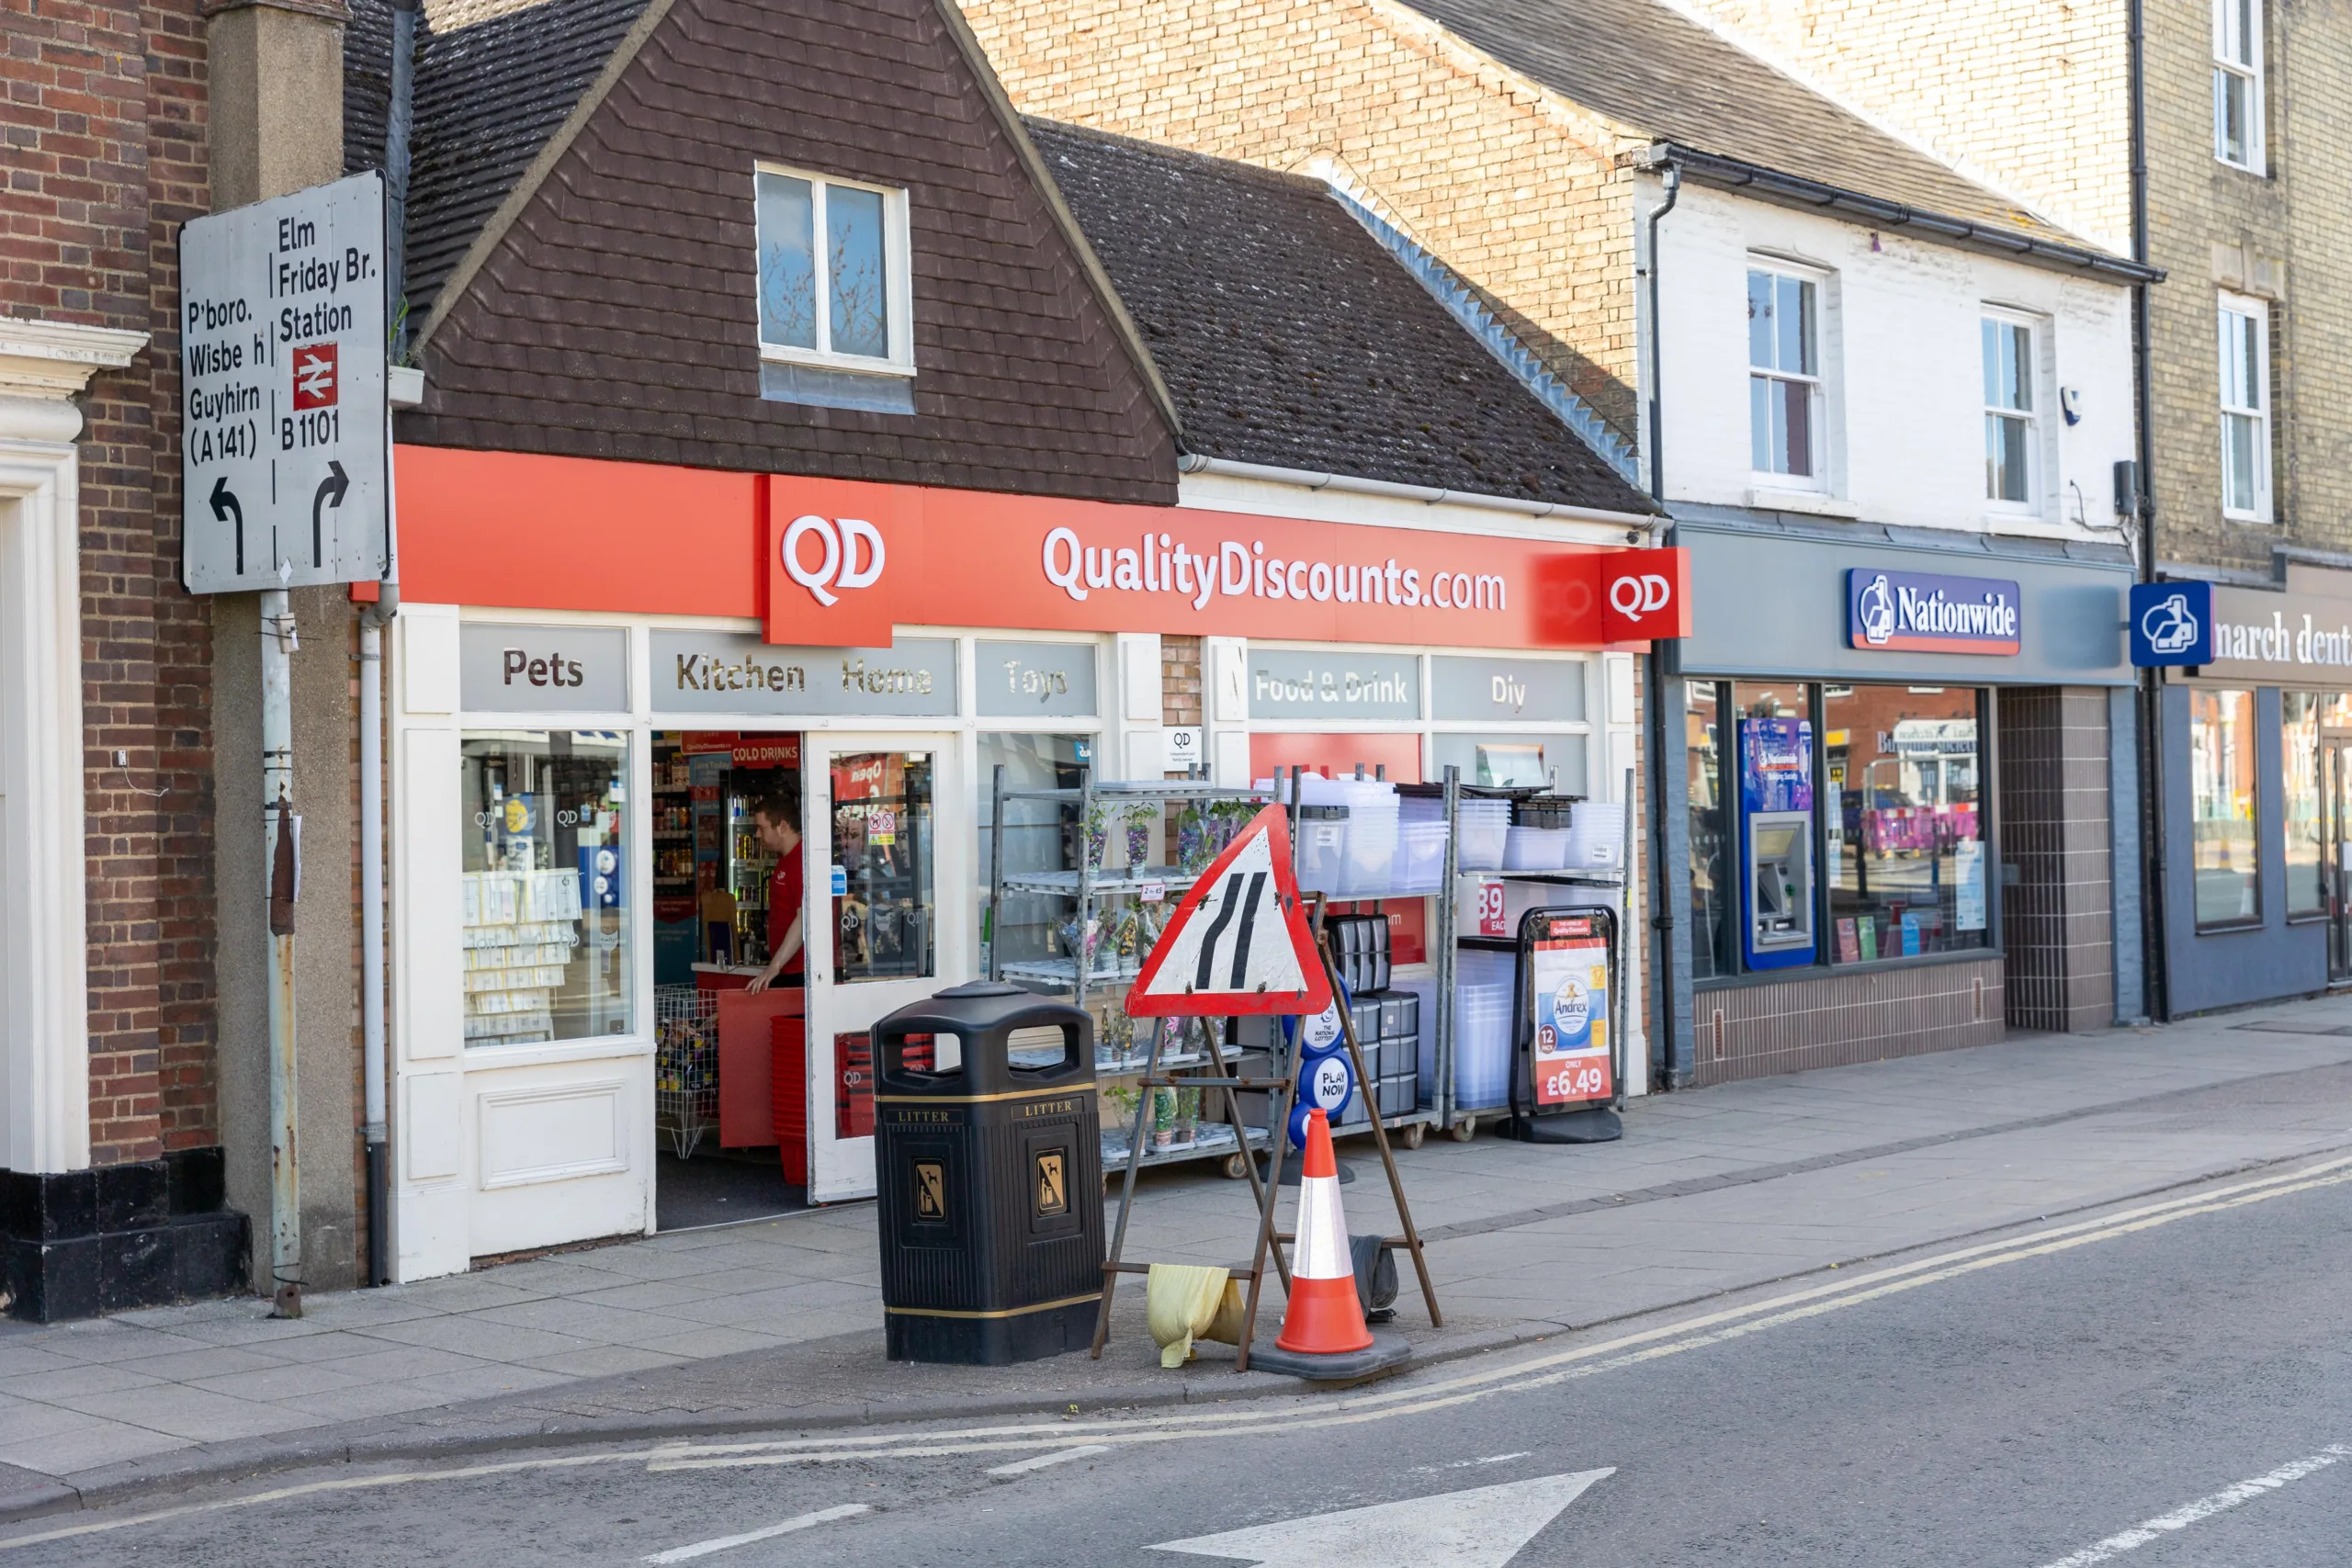 The shop that is closing is QD Stores (Quality Discounts) with the company saying it has “become no longer viable for us to keep open”. It will close in May.